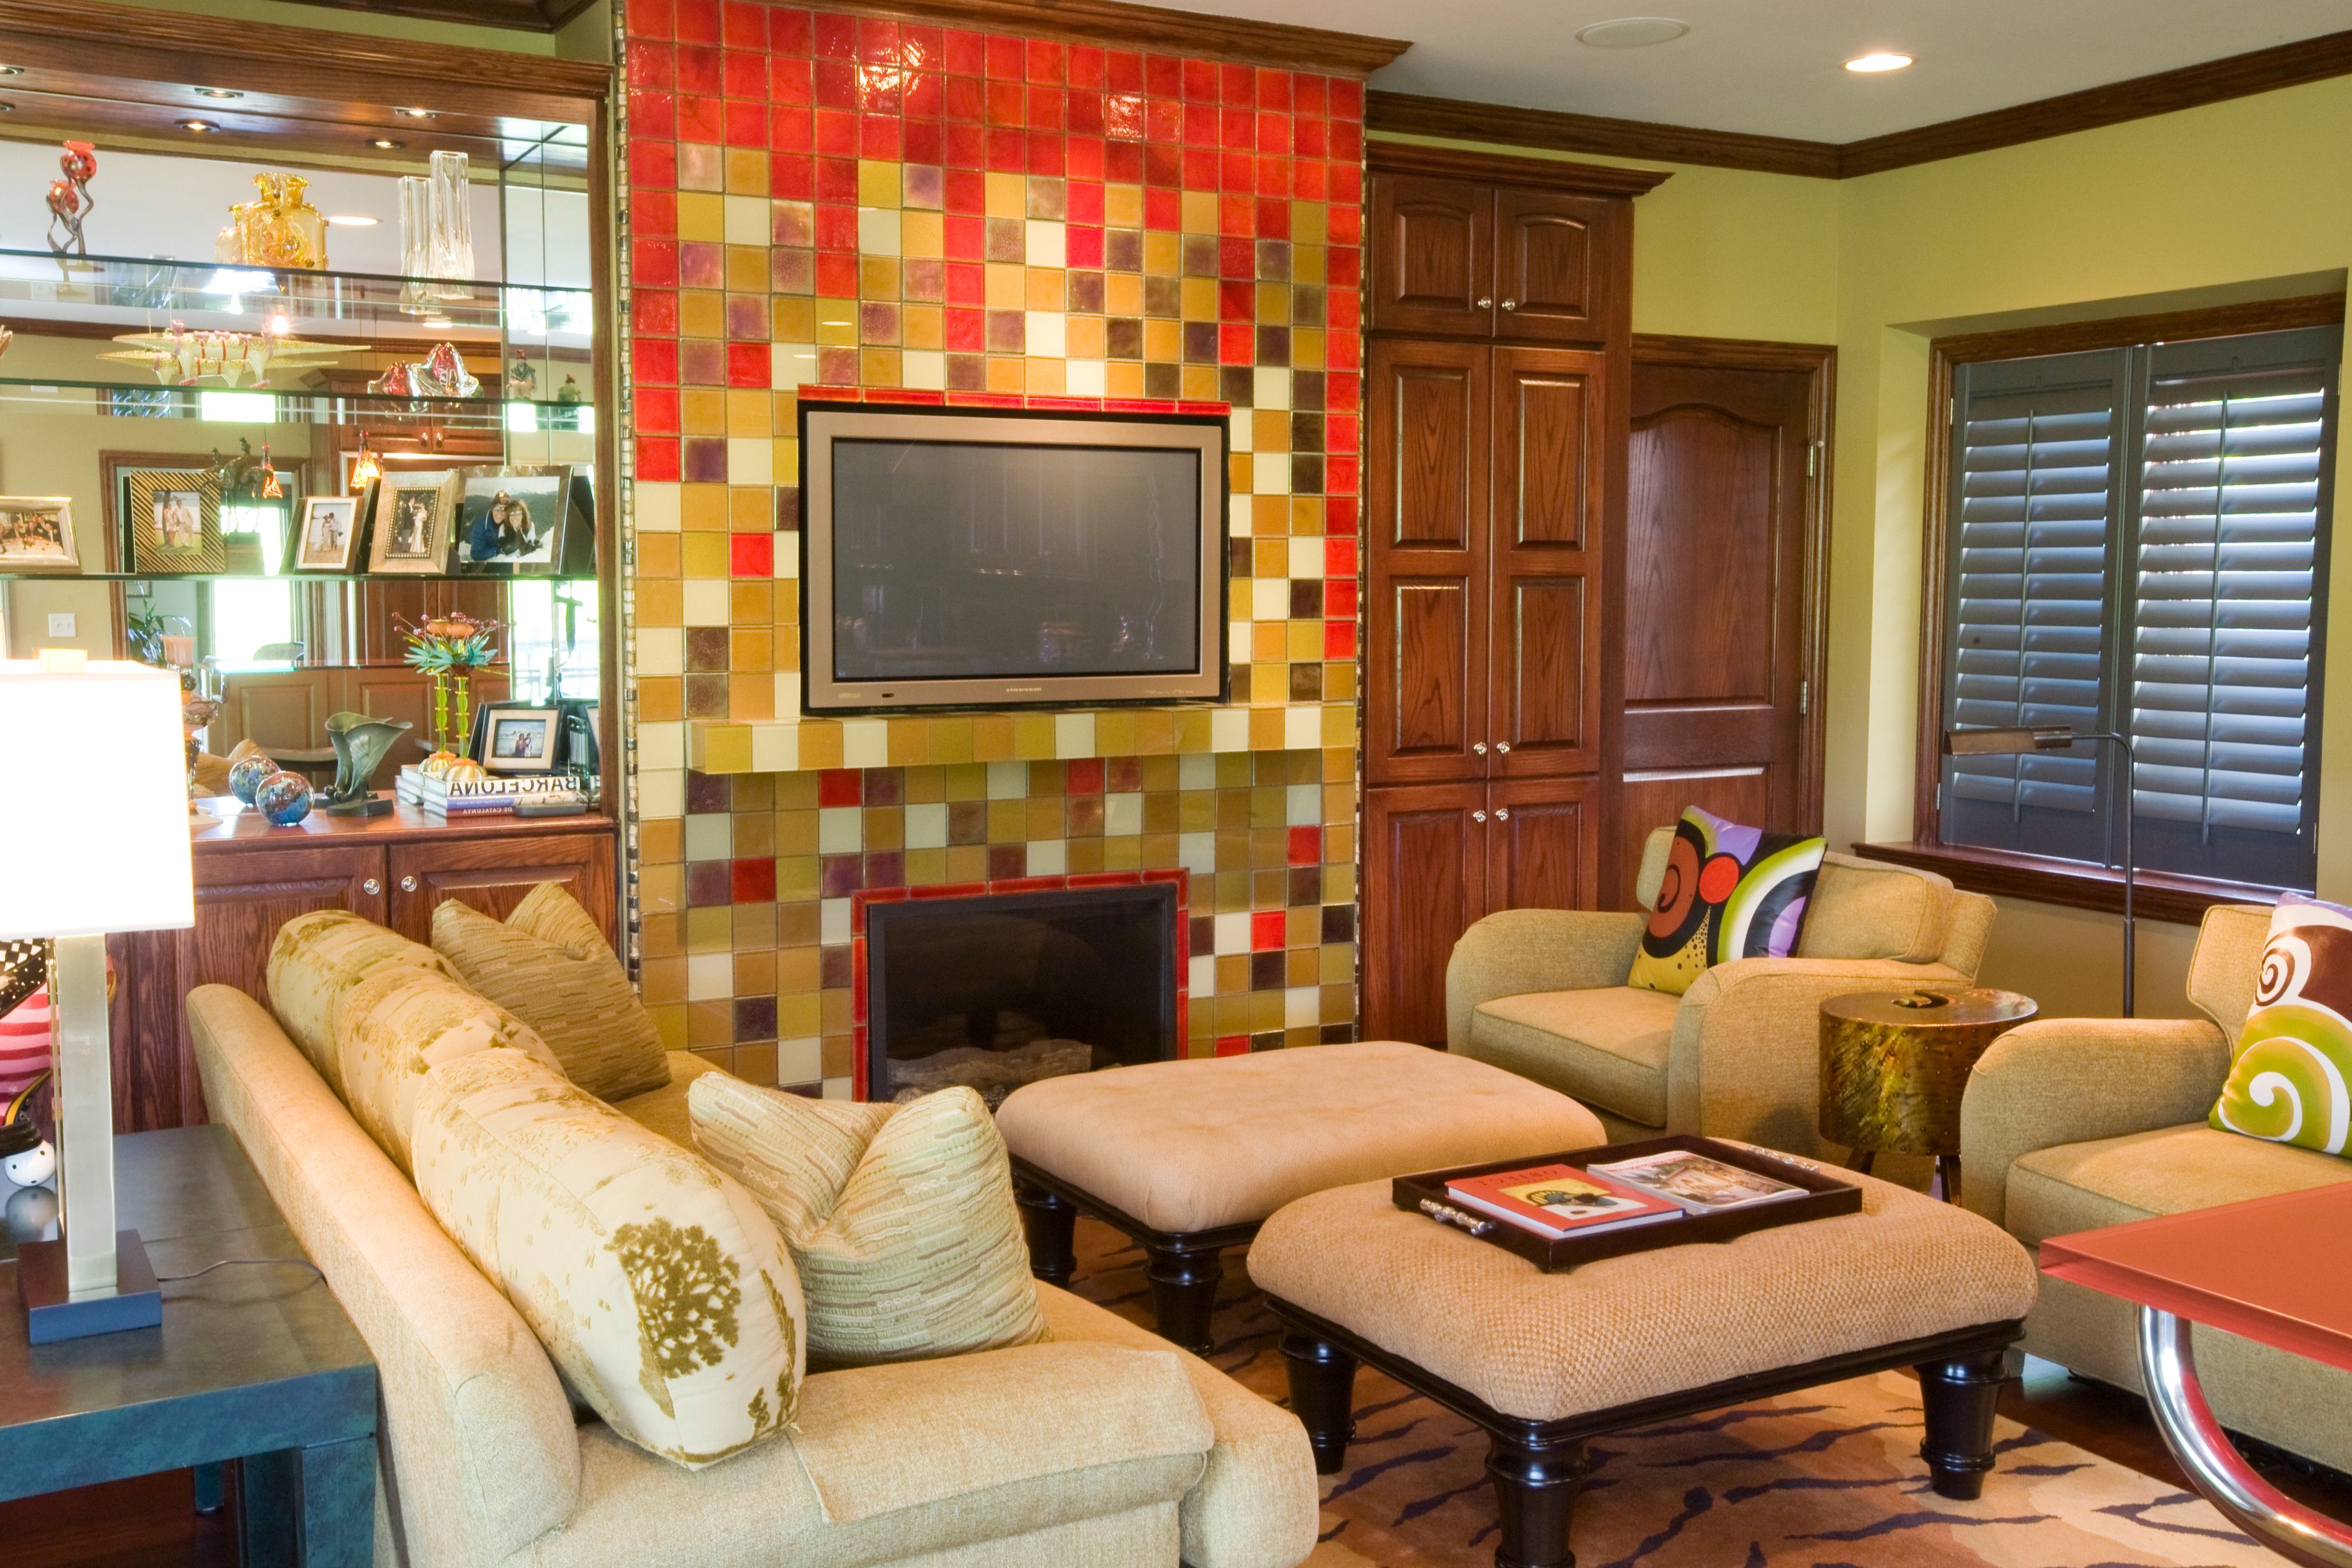 Modern Mexican Living Room Design With Colorful Tiled Fireplace (View 12 of 12)